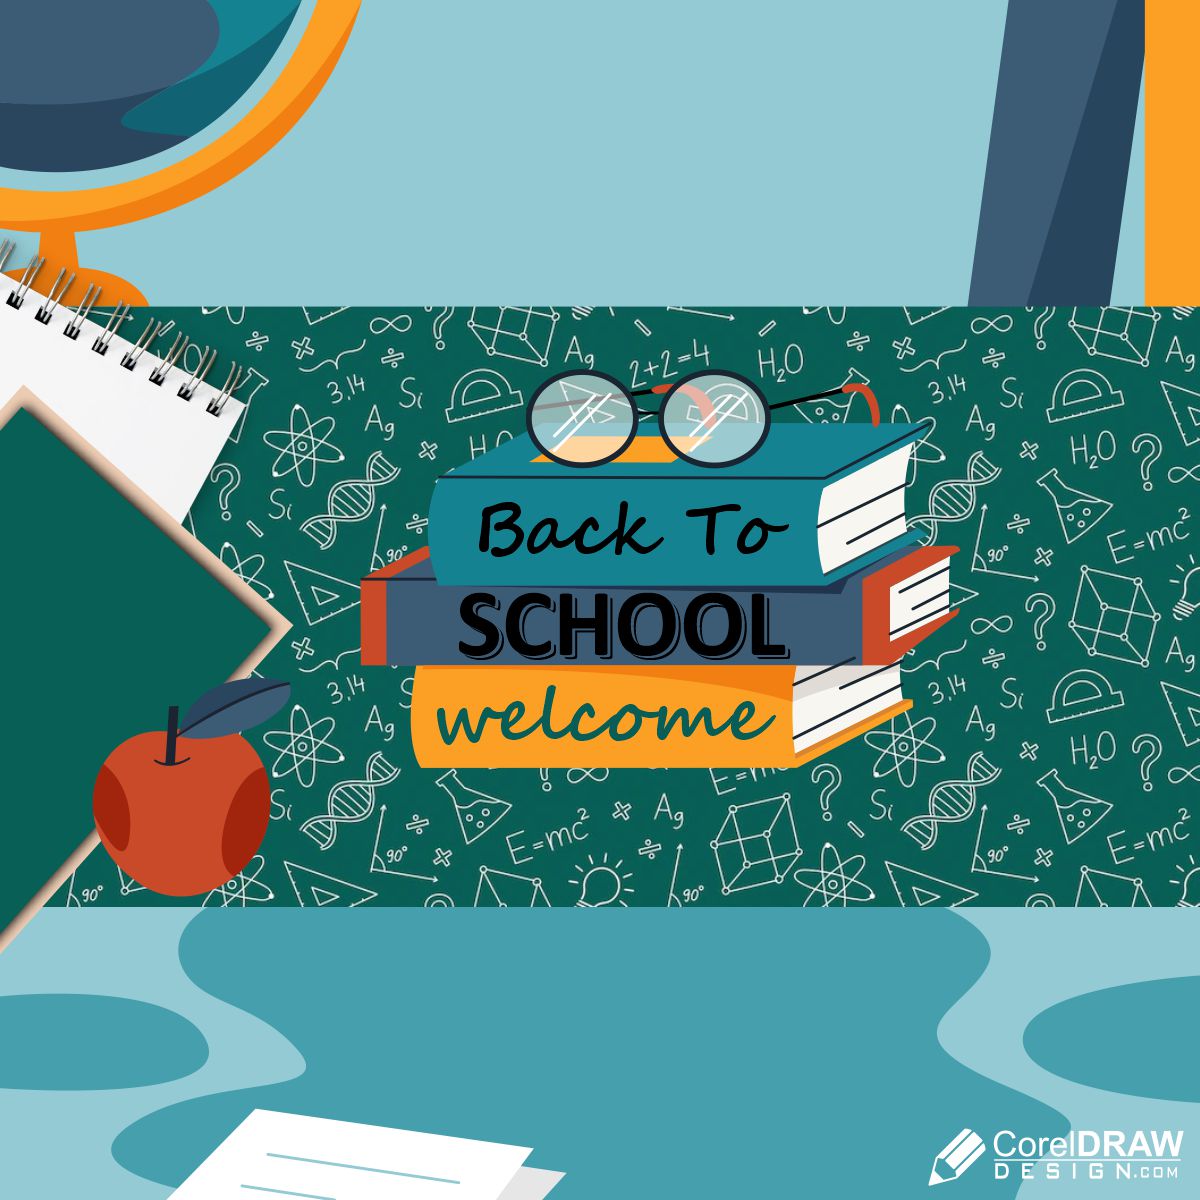 Back To School Welcome poster image vector free design